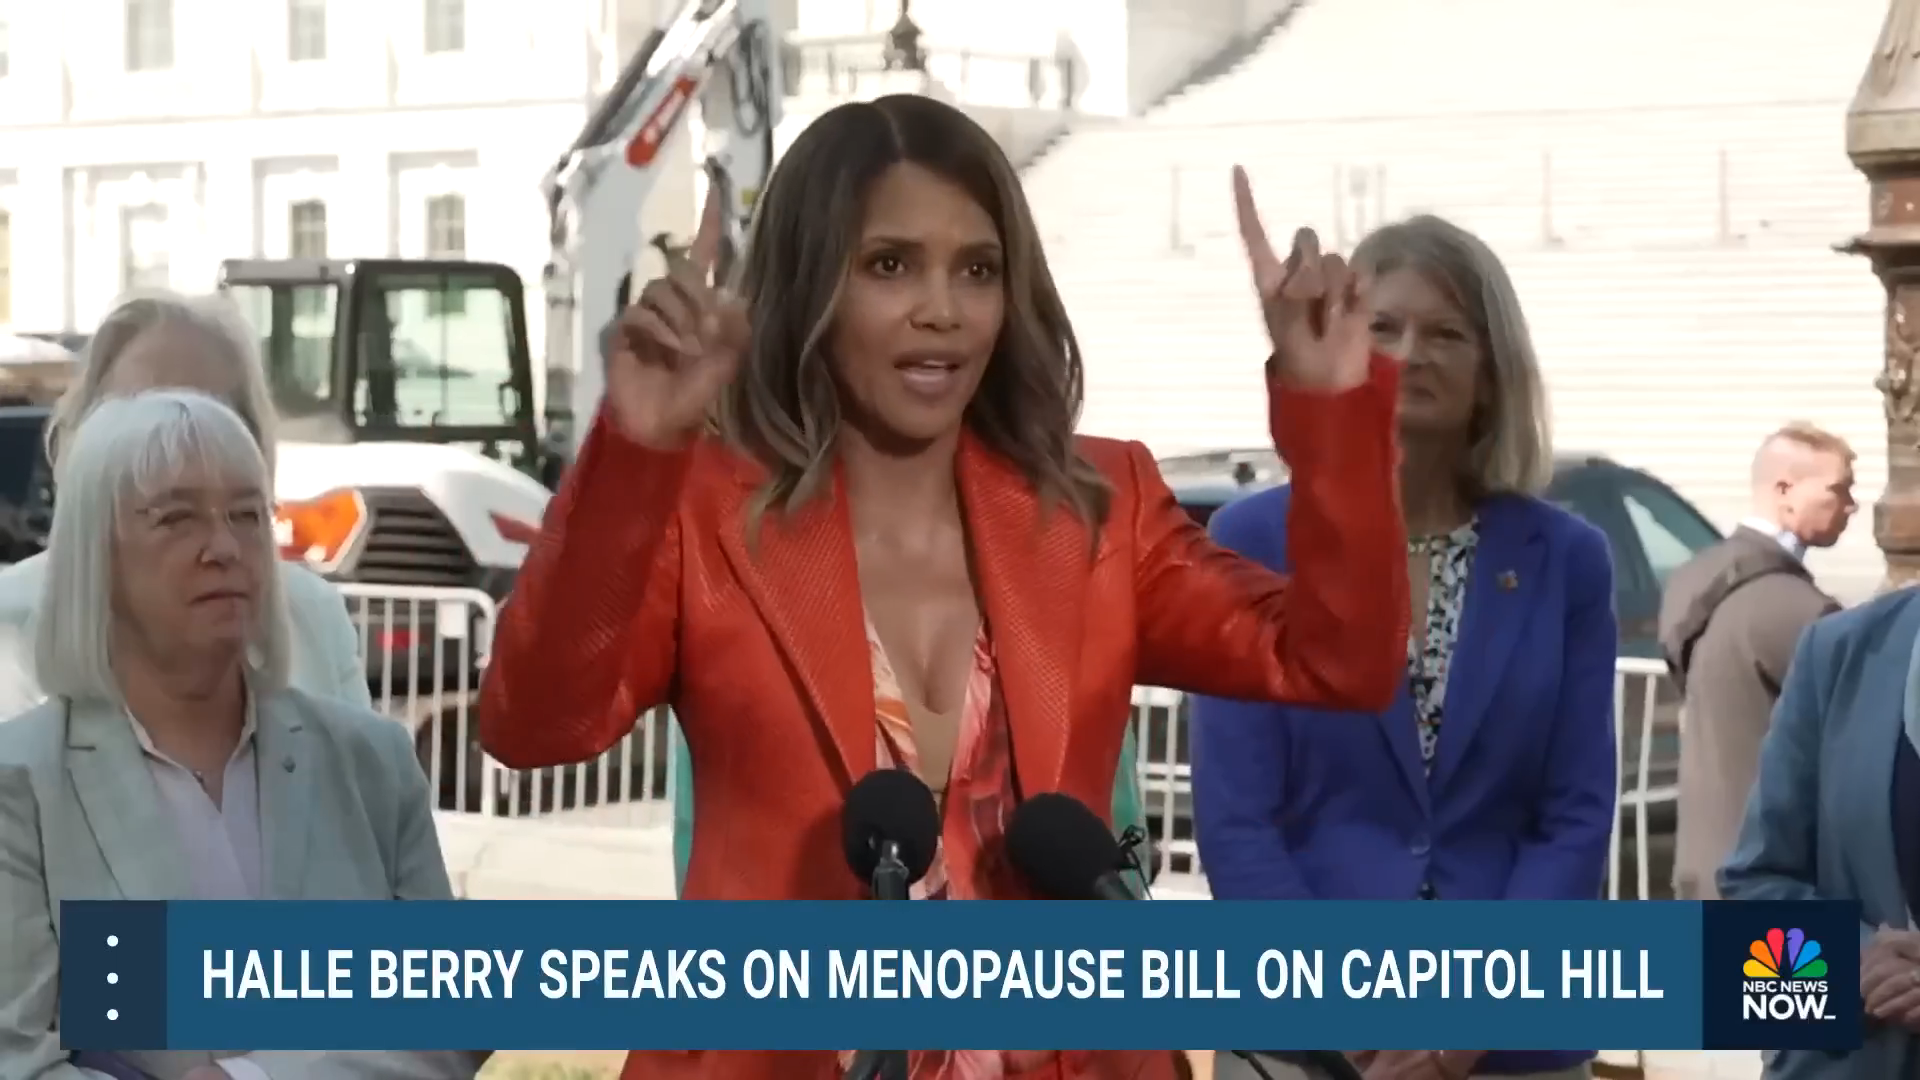 Halle Berry Speaks on Menopause Bill on Capitol Hill